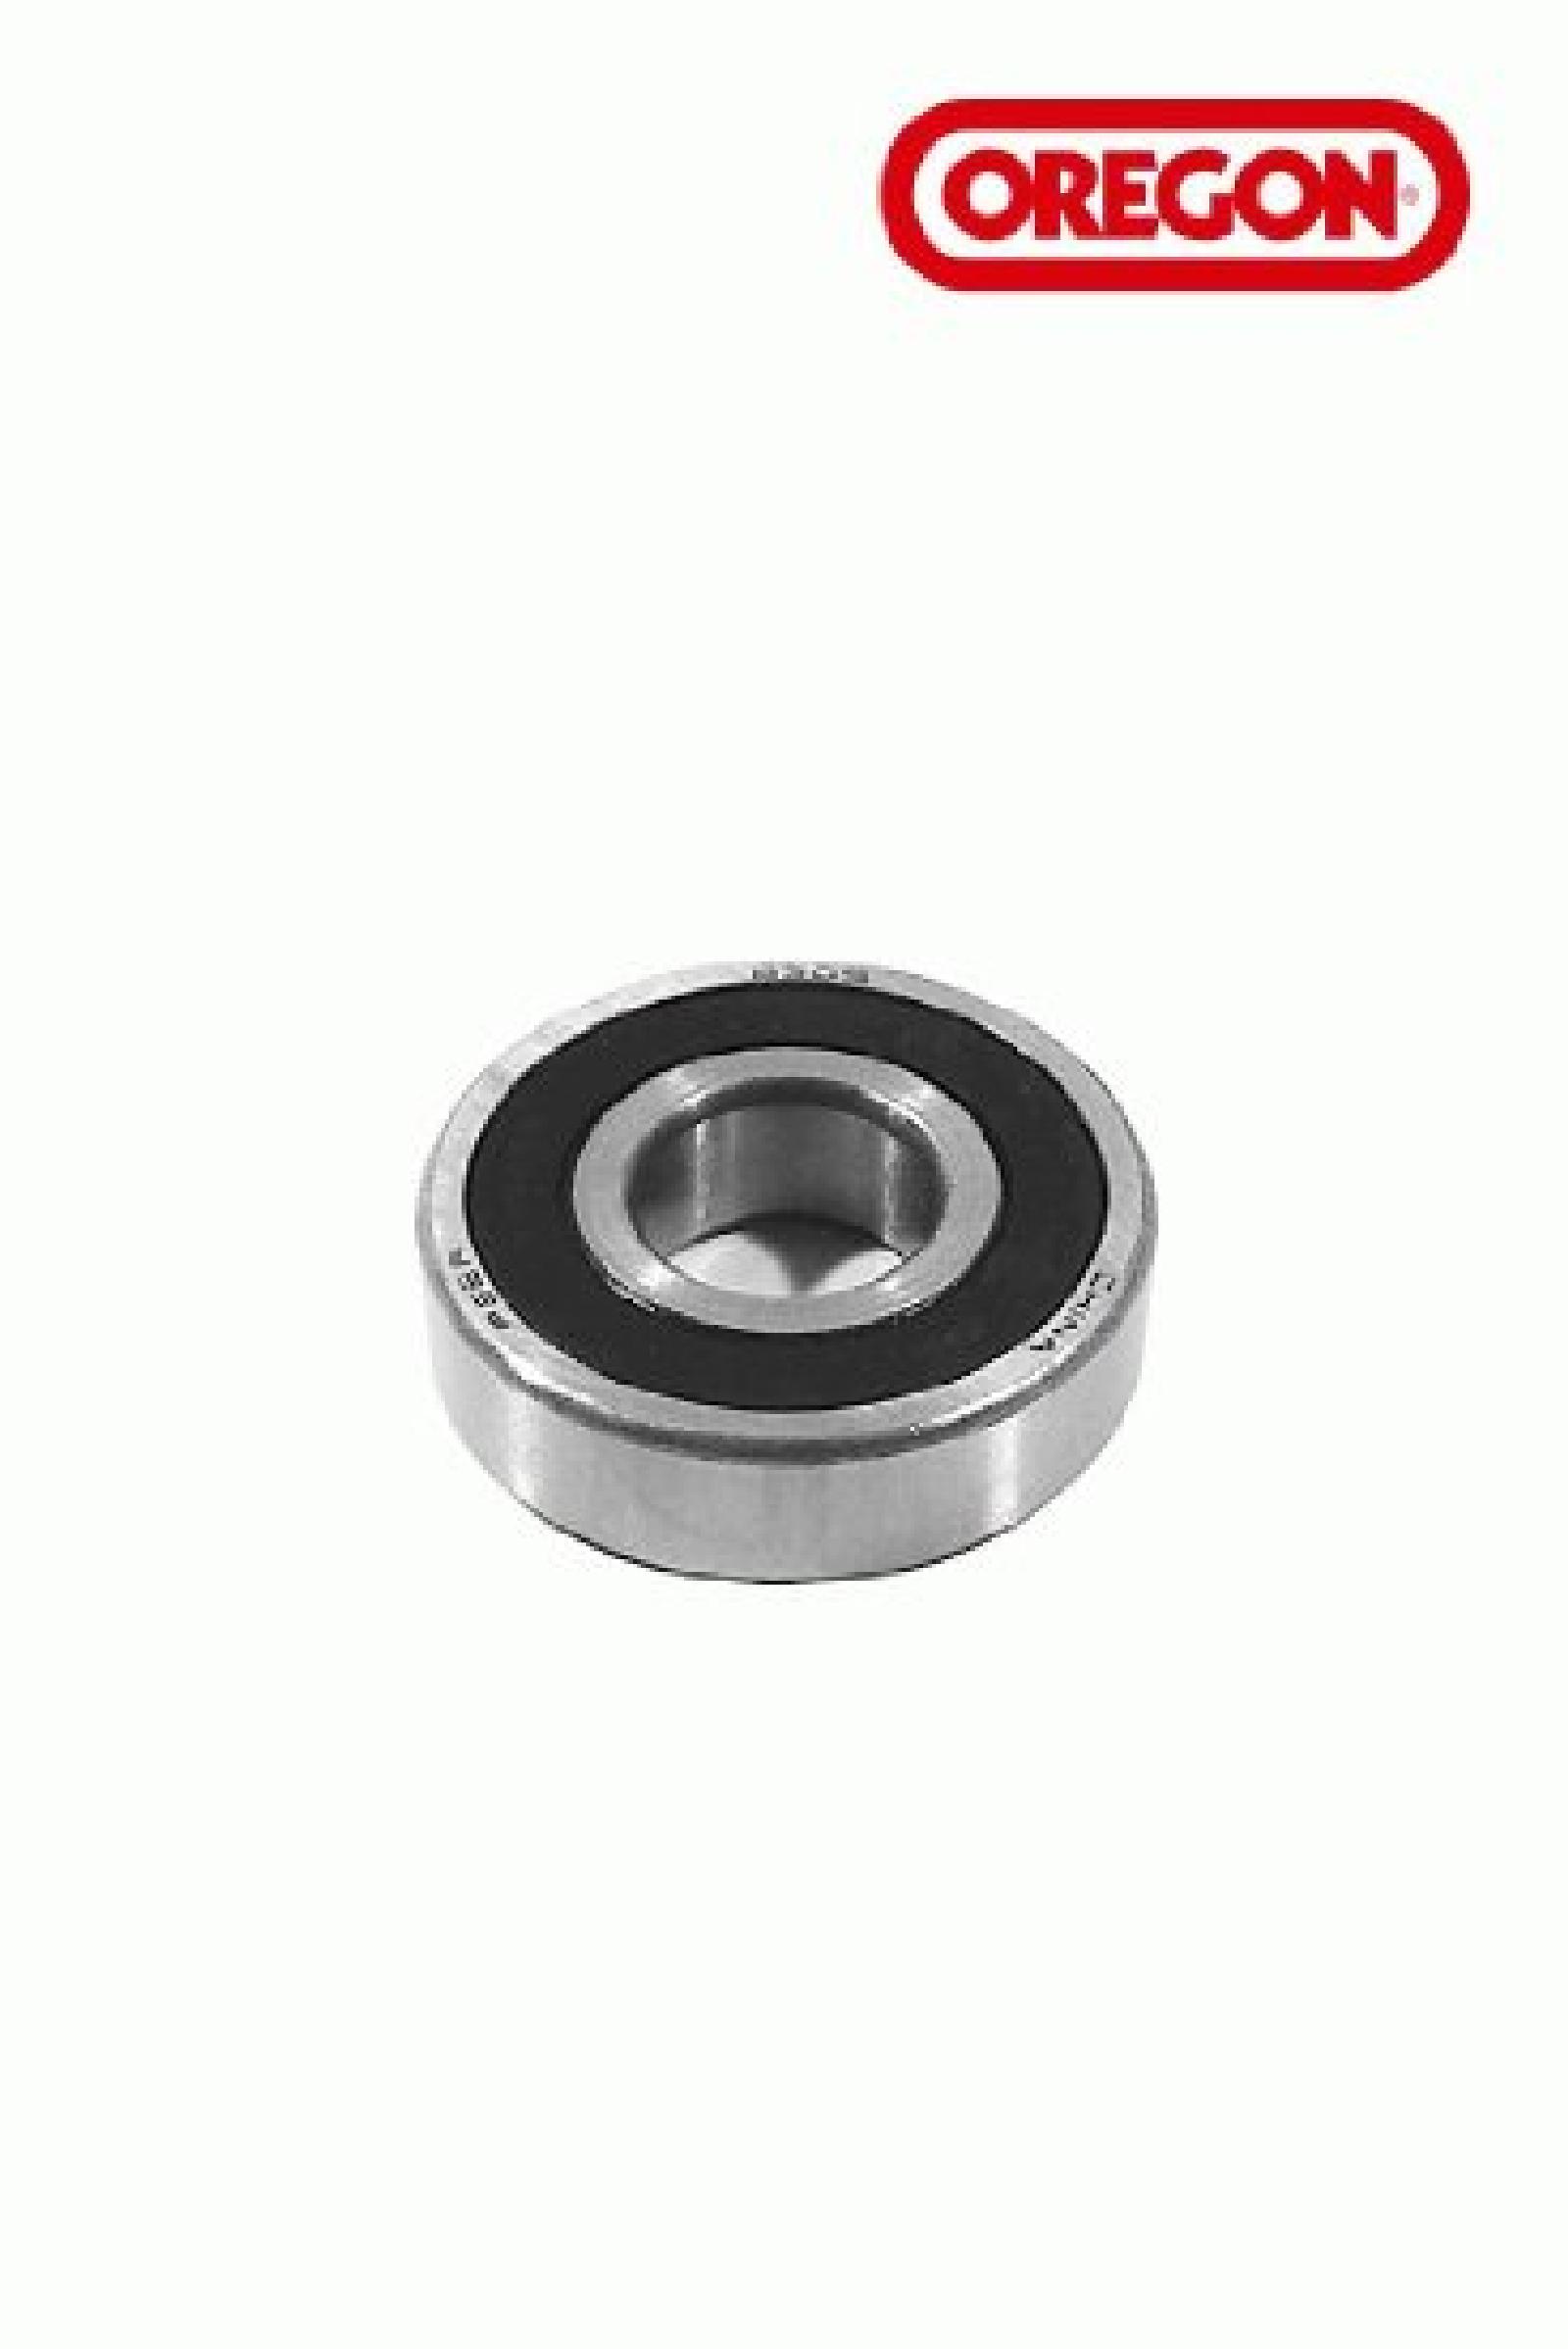 BEARING, BALL MAGNUM 6305 part# 45-220 by Oregon